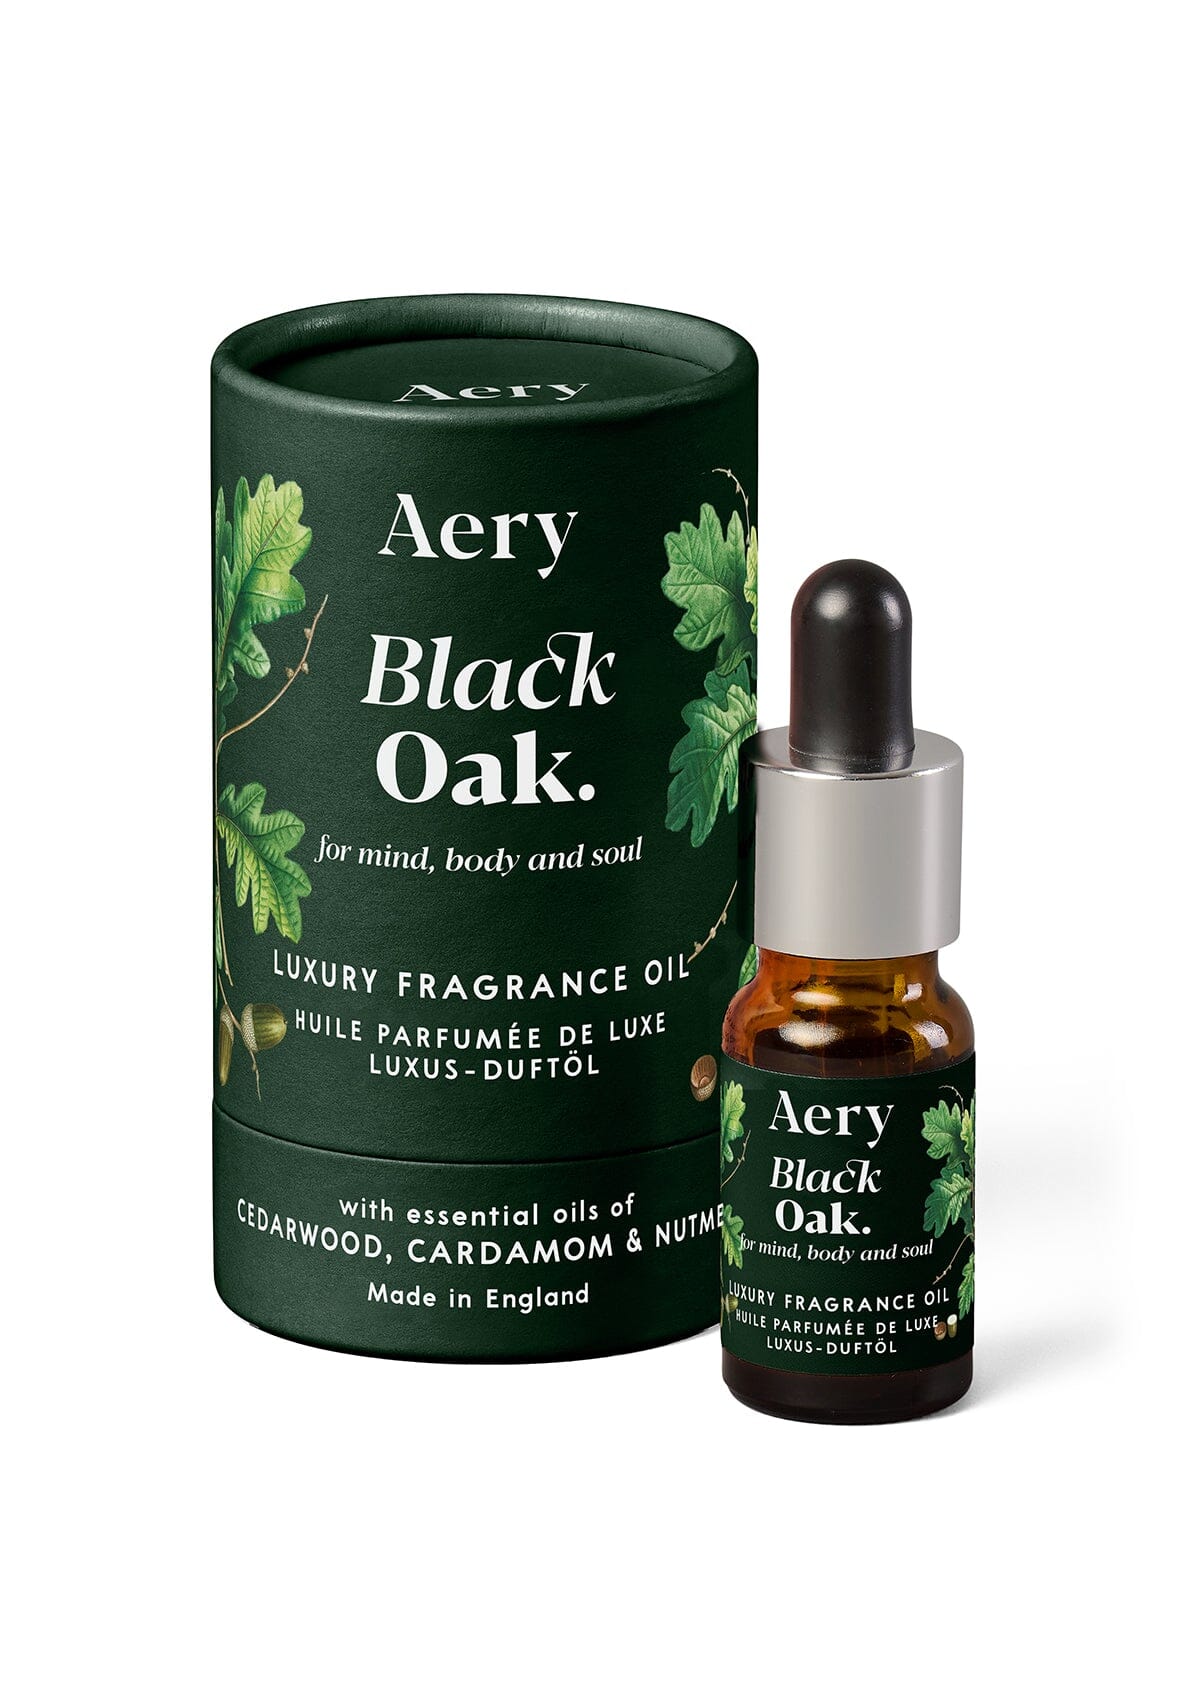 Black Oak Fragrance Oil by Aery displayed next to product packaging on white background 